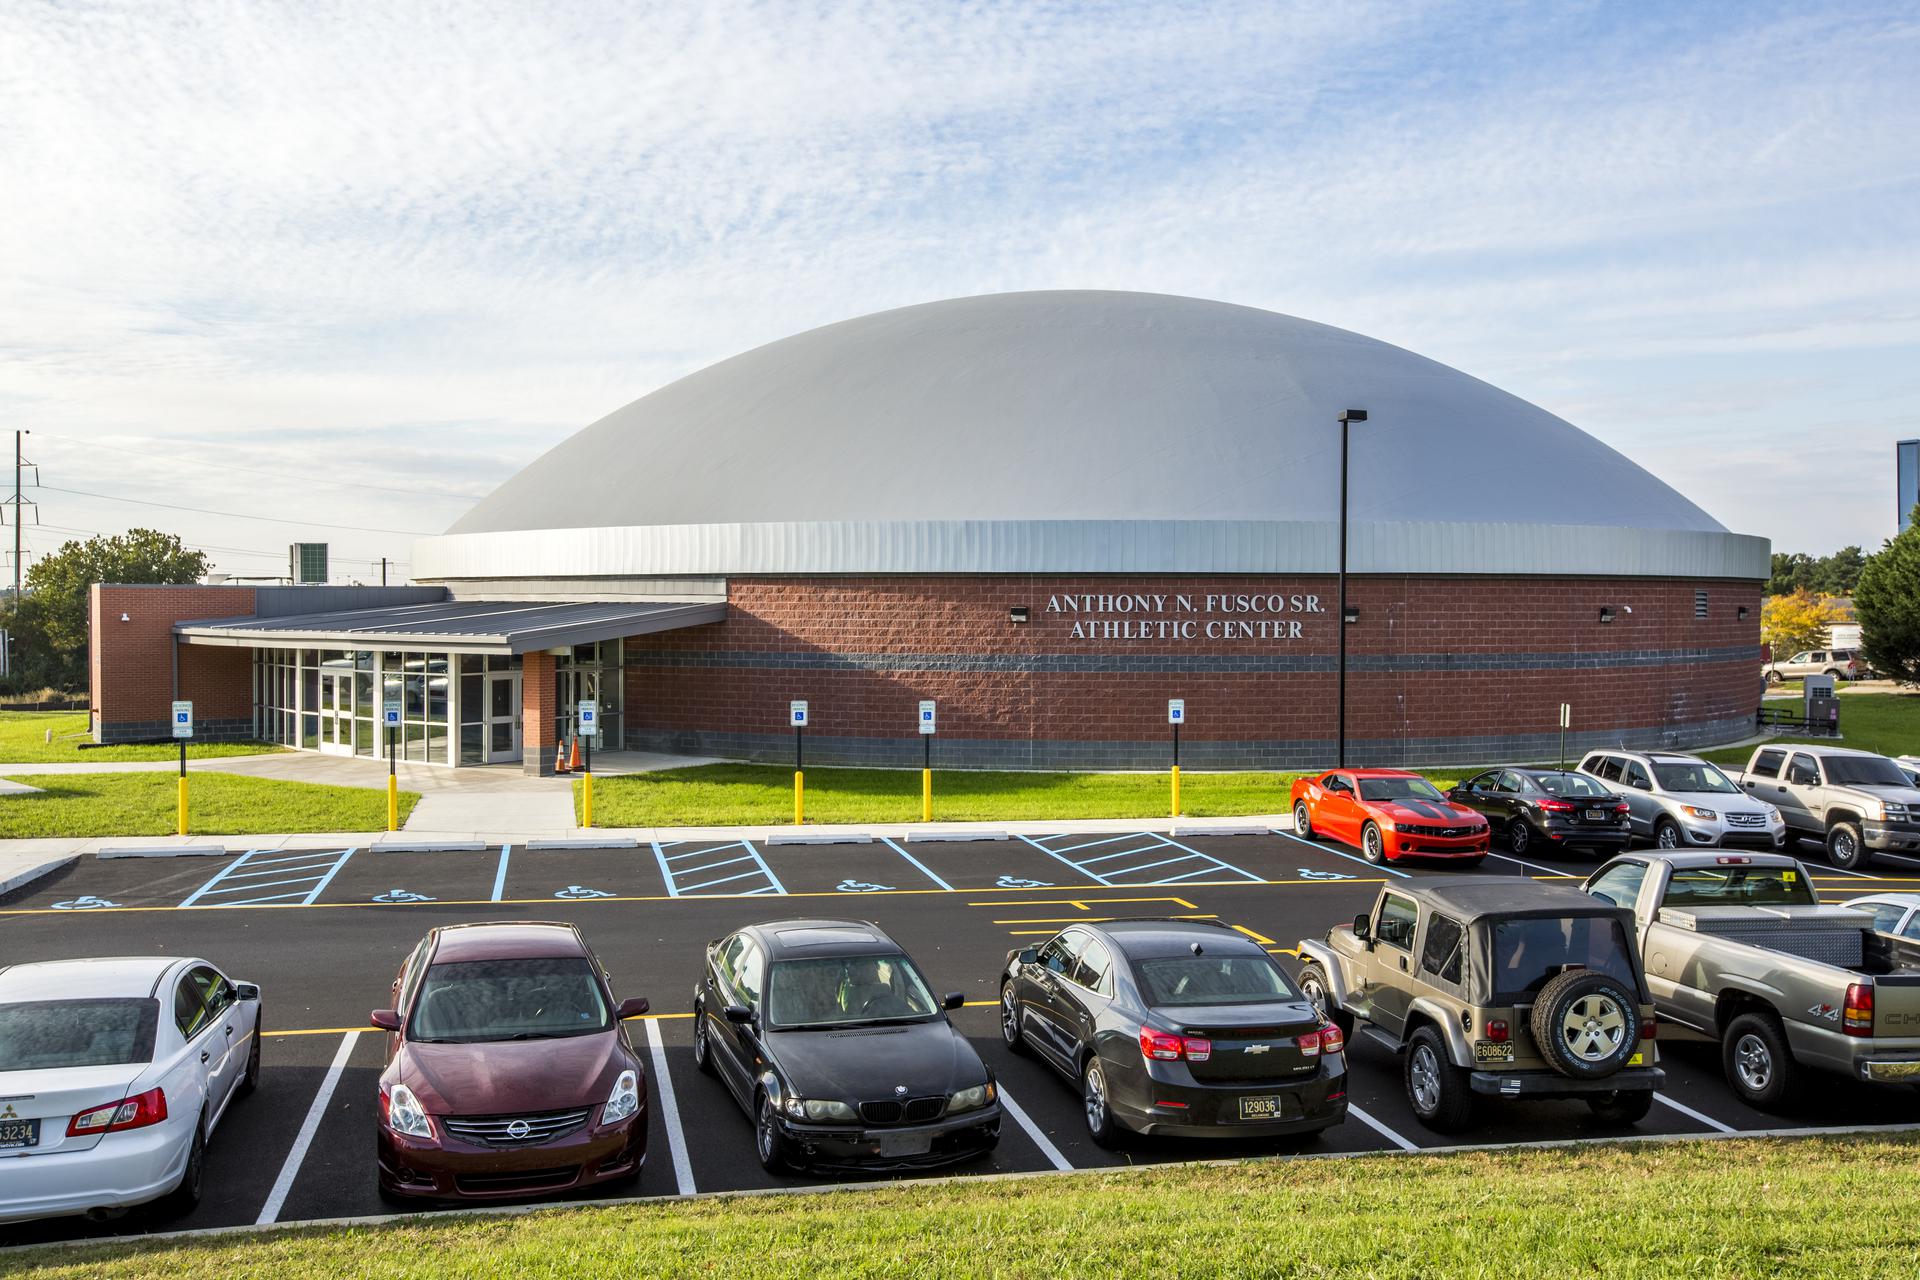 Anthony N. Fusco Sr. Athletic Center outside view.